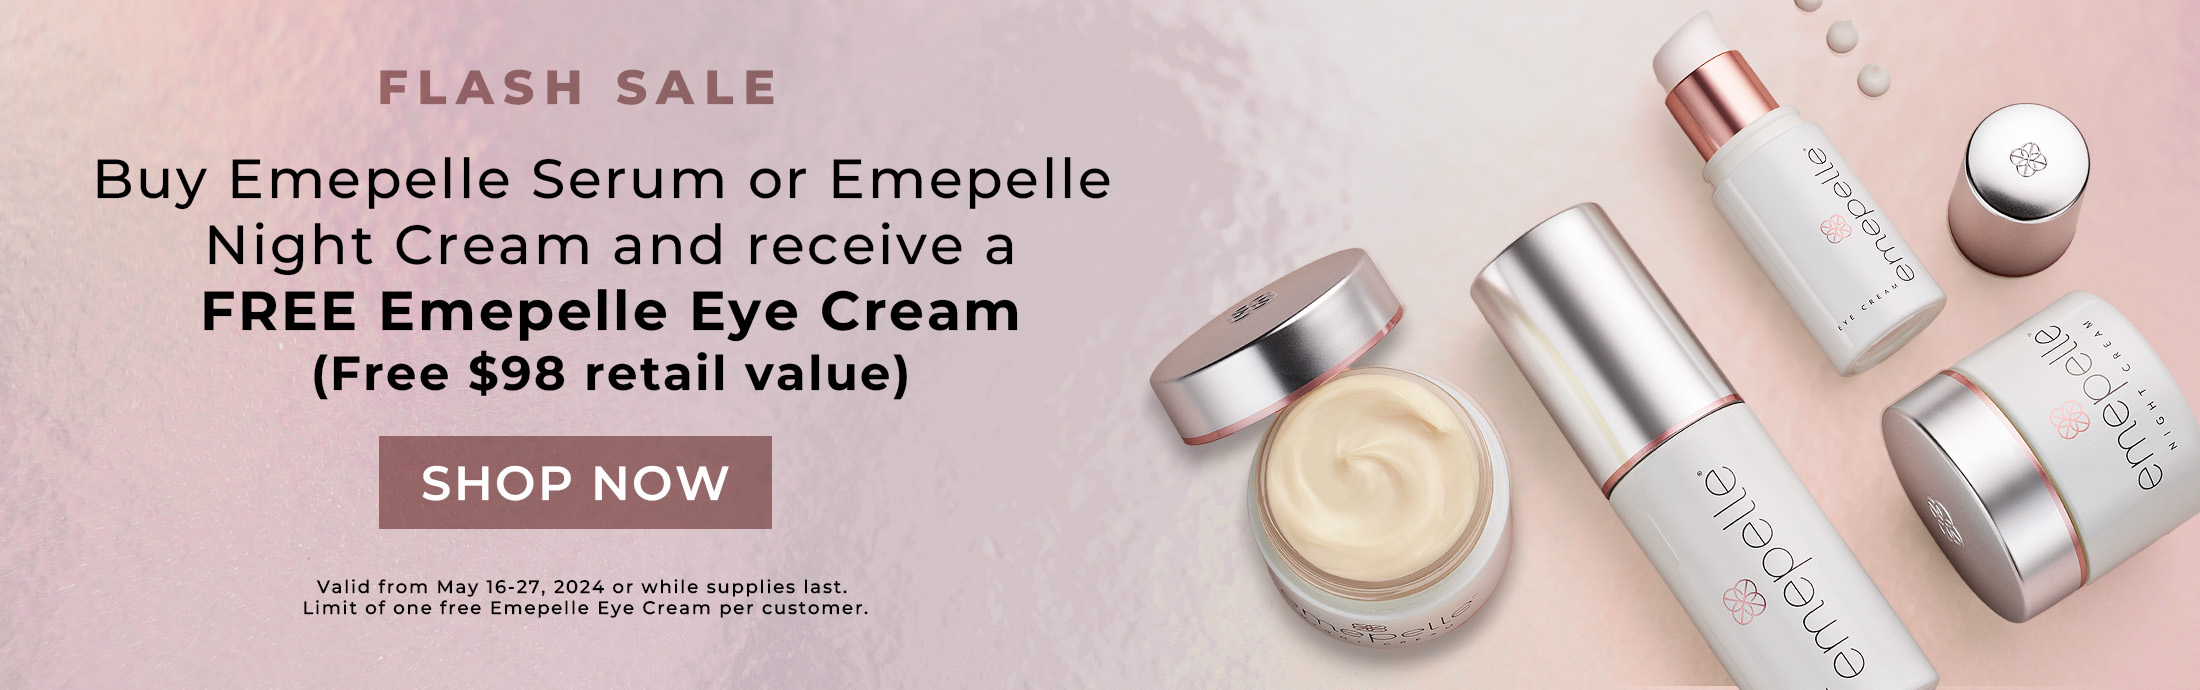 Flash Sale. Buy Emepelle Serum or Emepelle Night Cream and receive a free Emepelle Eye Cream (Free $98 retail value). Shop Now. Valid May 16 to 27, 2024